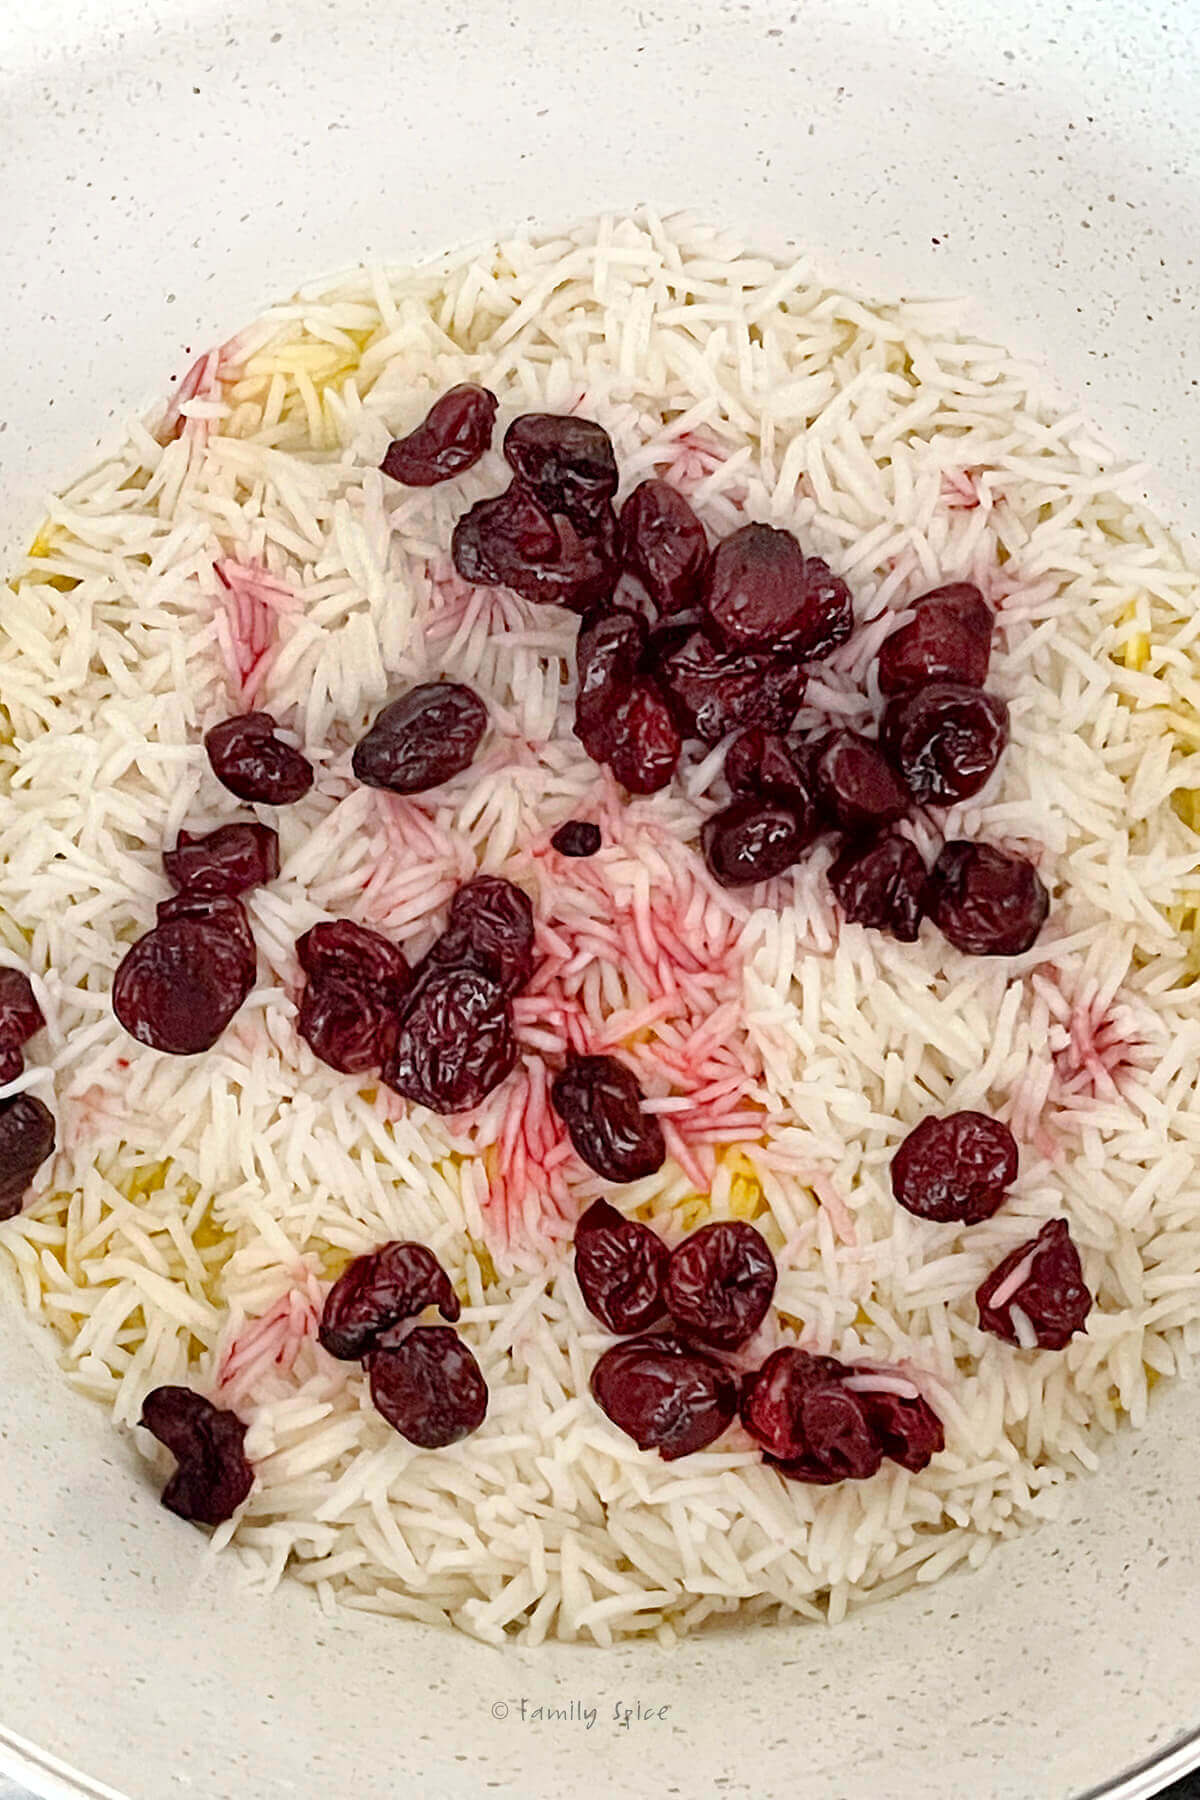 Sour cherries and syrup layered with basmati rice in a pot